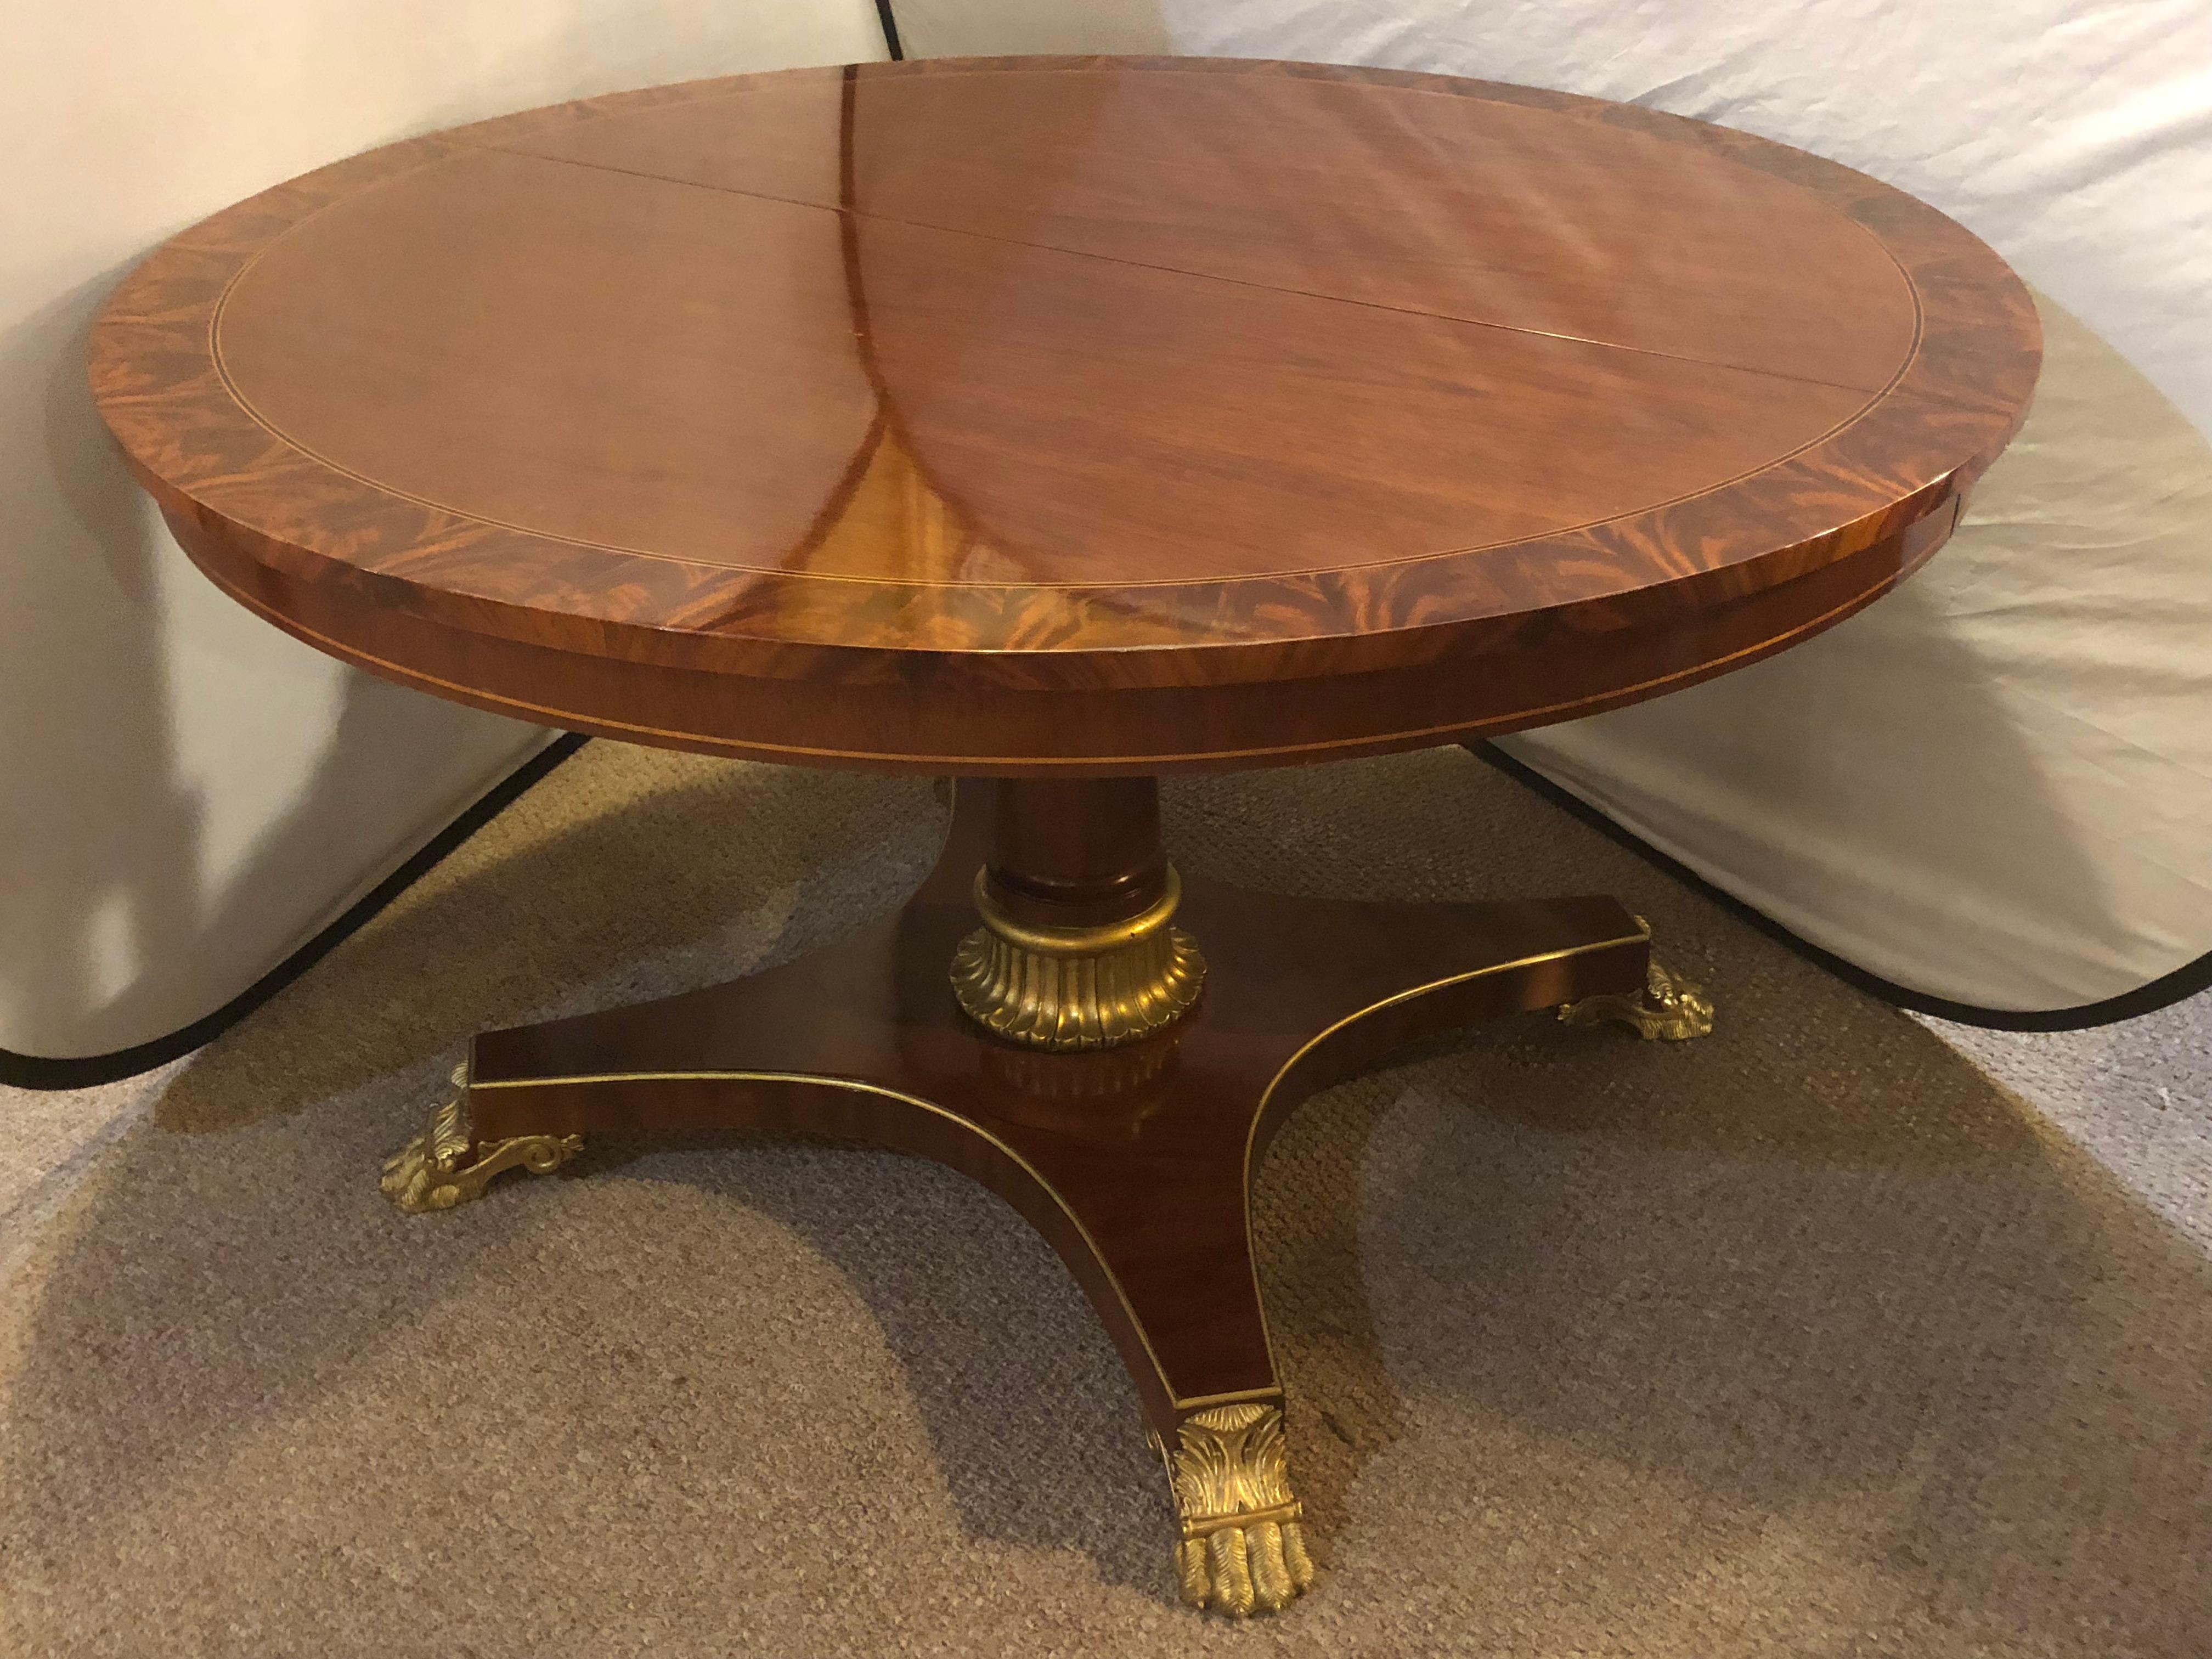 A circular Mid-Century Modern Kindel rosewood banded dining or center table with two leaves. This spectacular dining or center table is part of the Kindel legacy line. The flame mahogany table top having a fine flame mahogany and ebony border